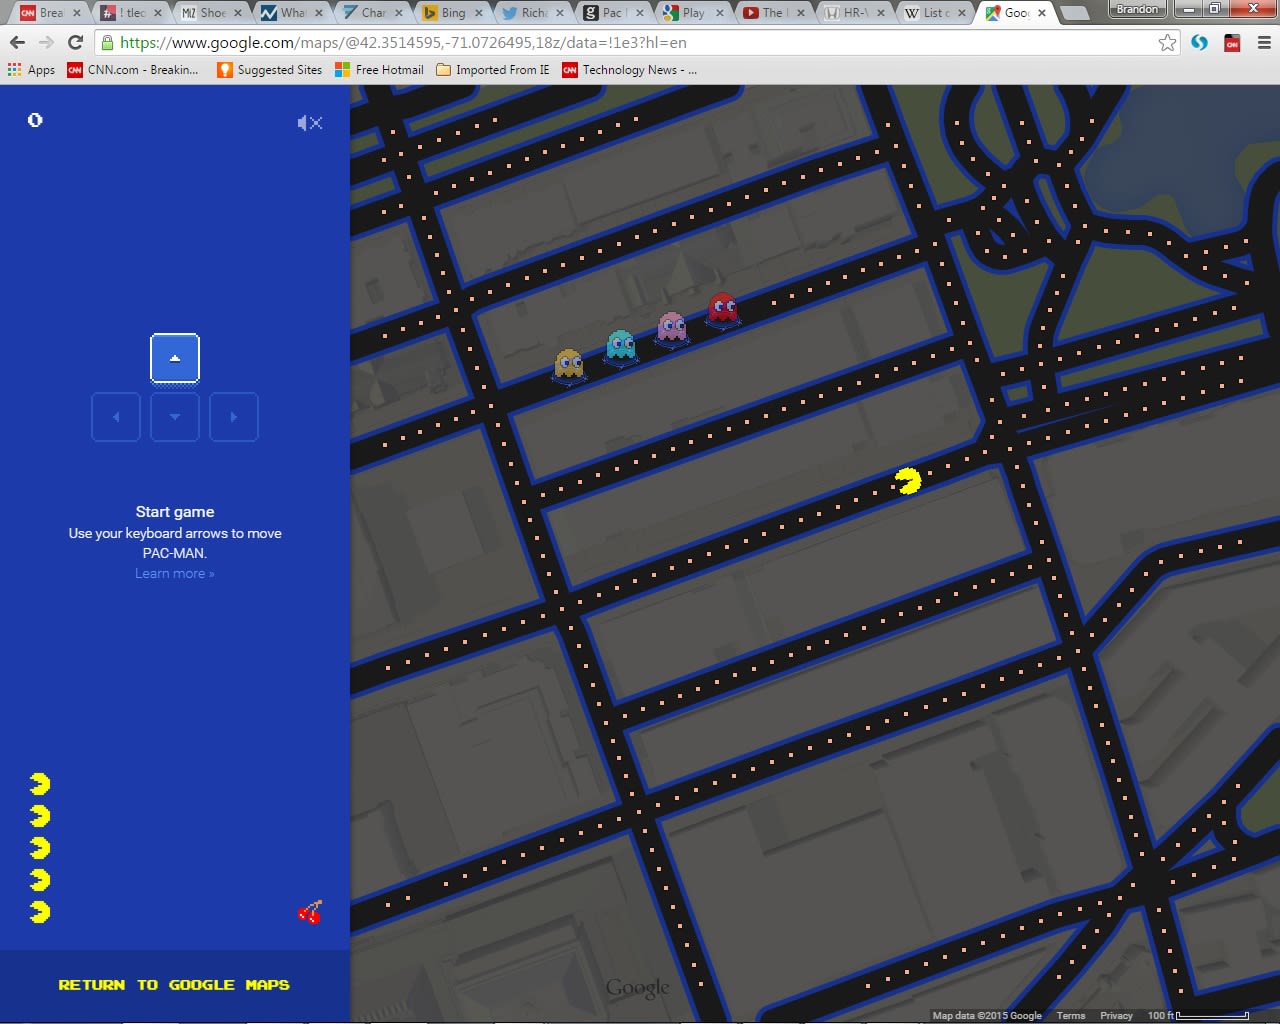 Google has previously turned its Map function into a Pac-Man game. Here, the power-pellet eating character roams the streets of Boston.